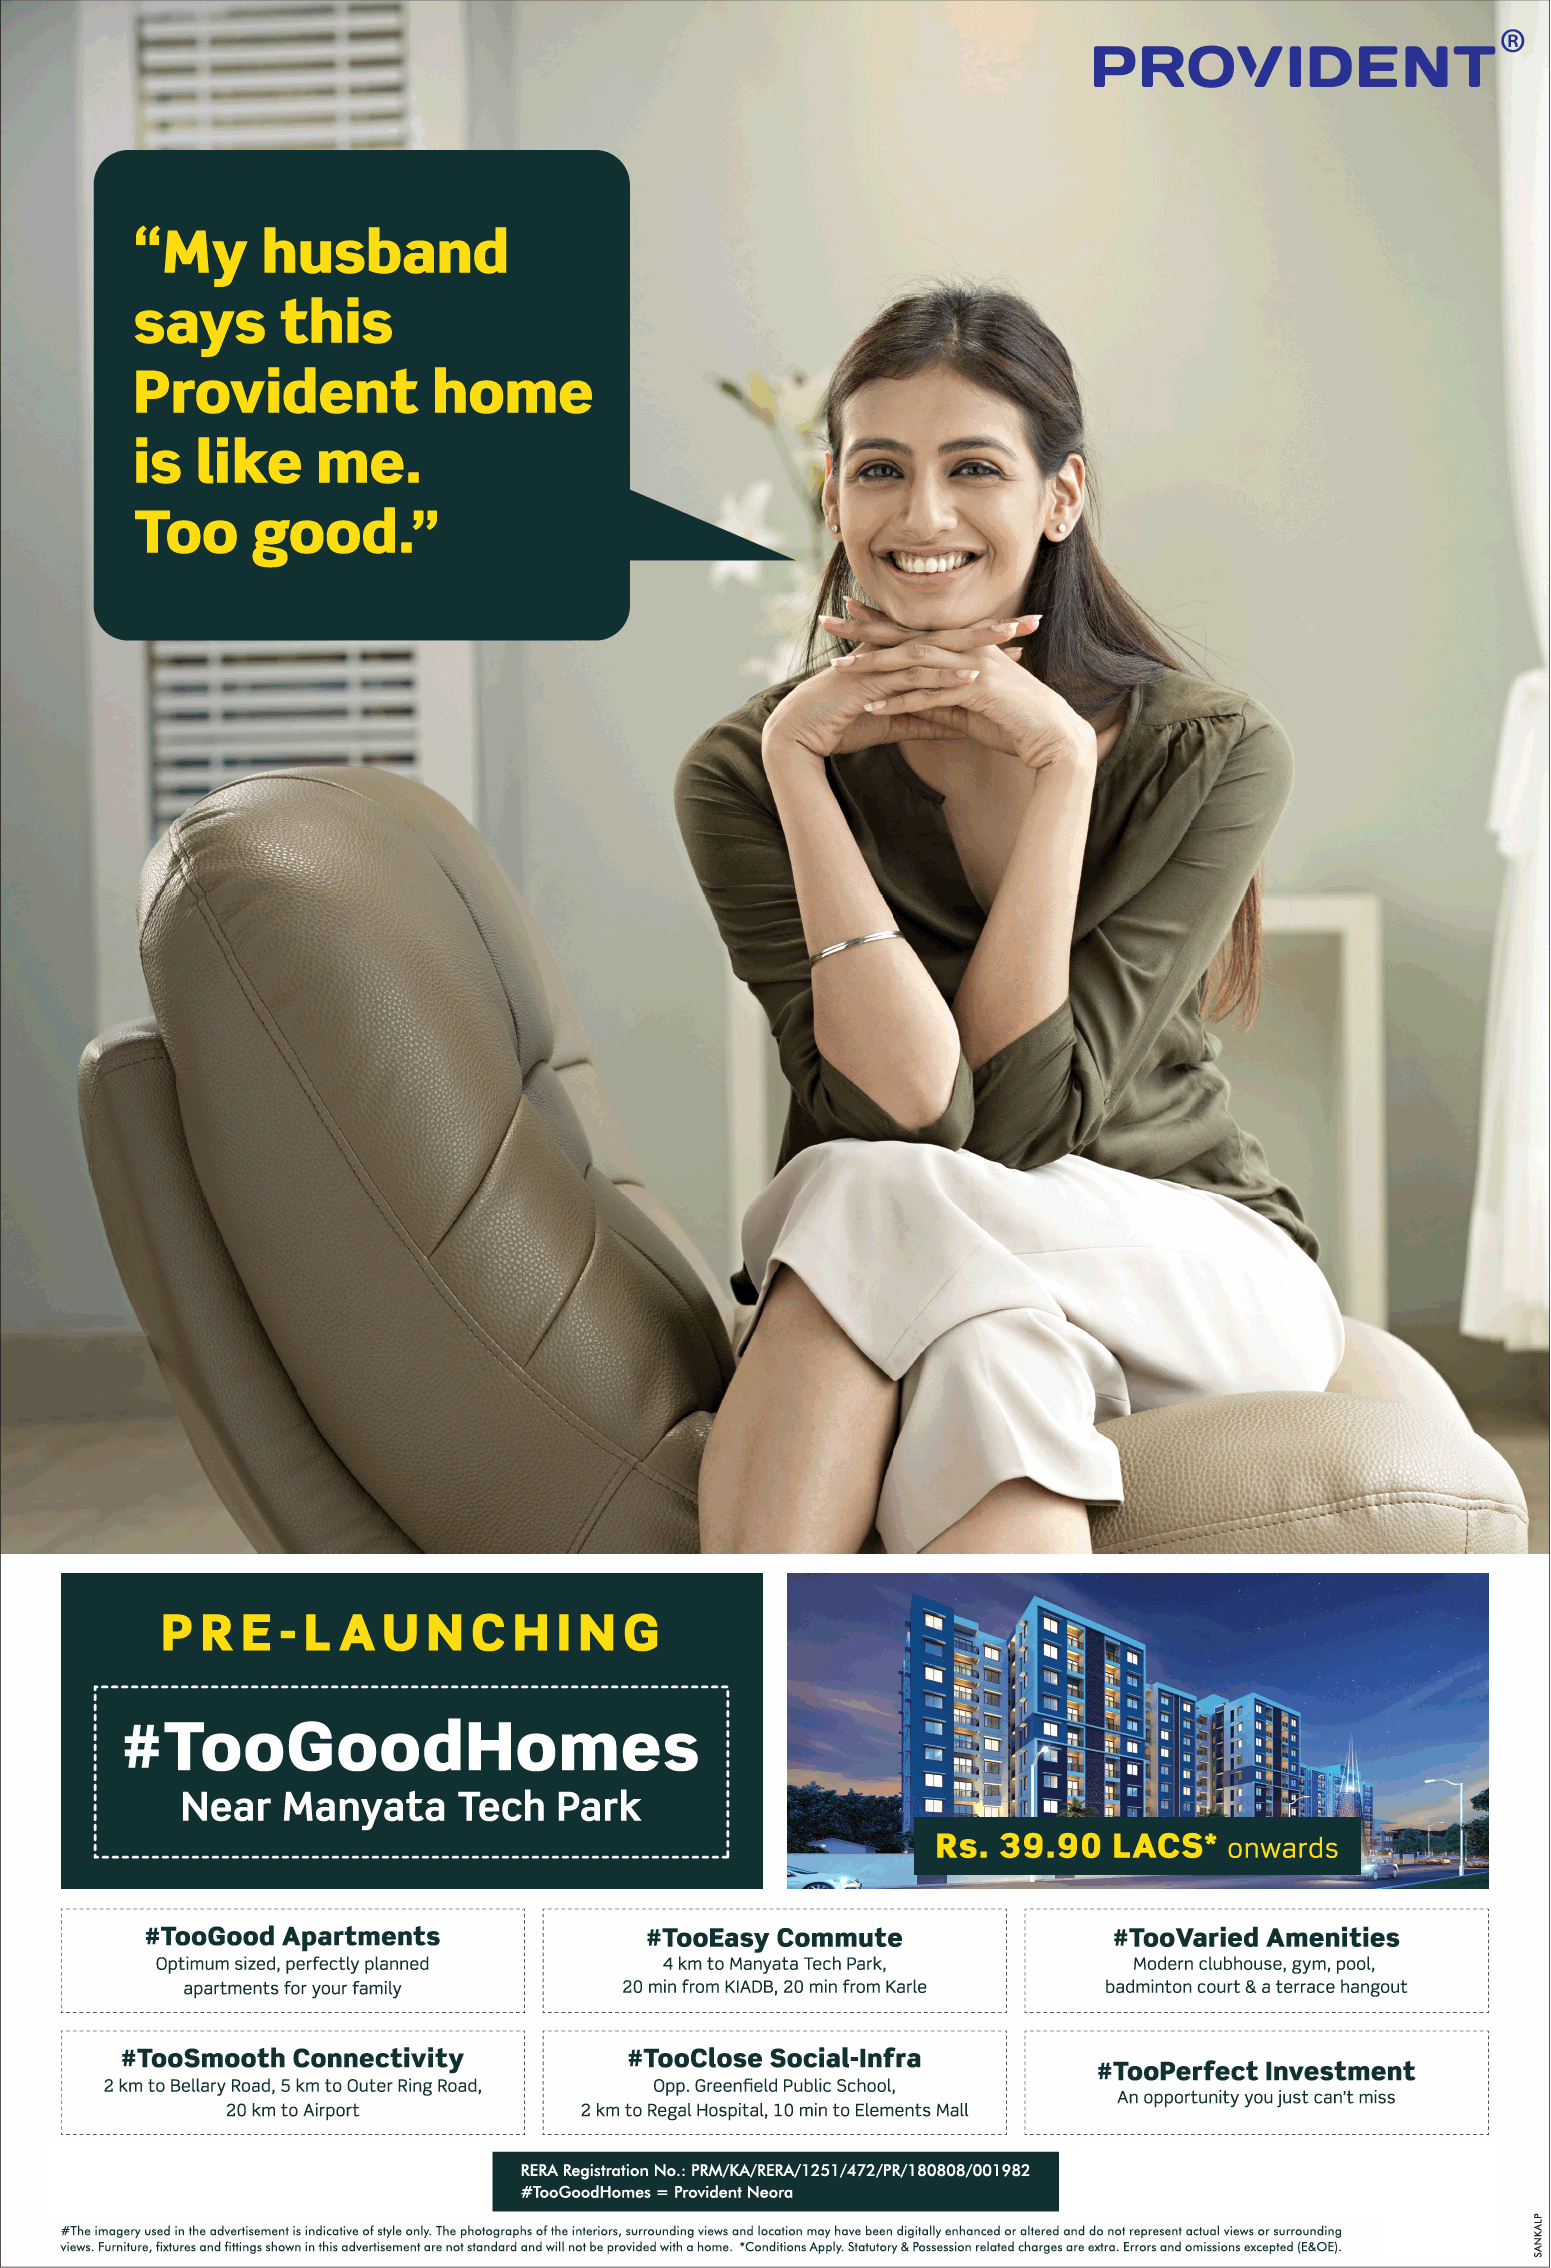 Provident launching Too Good Homes in Bangalore